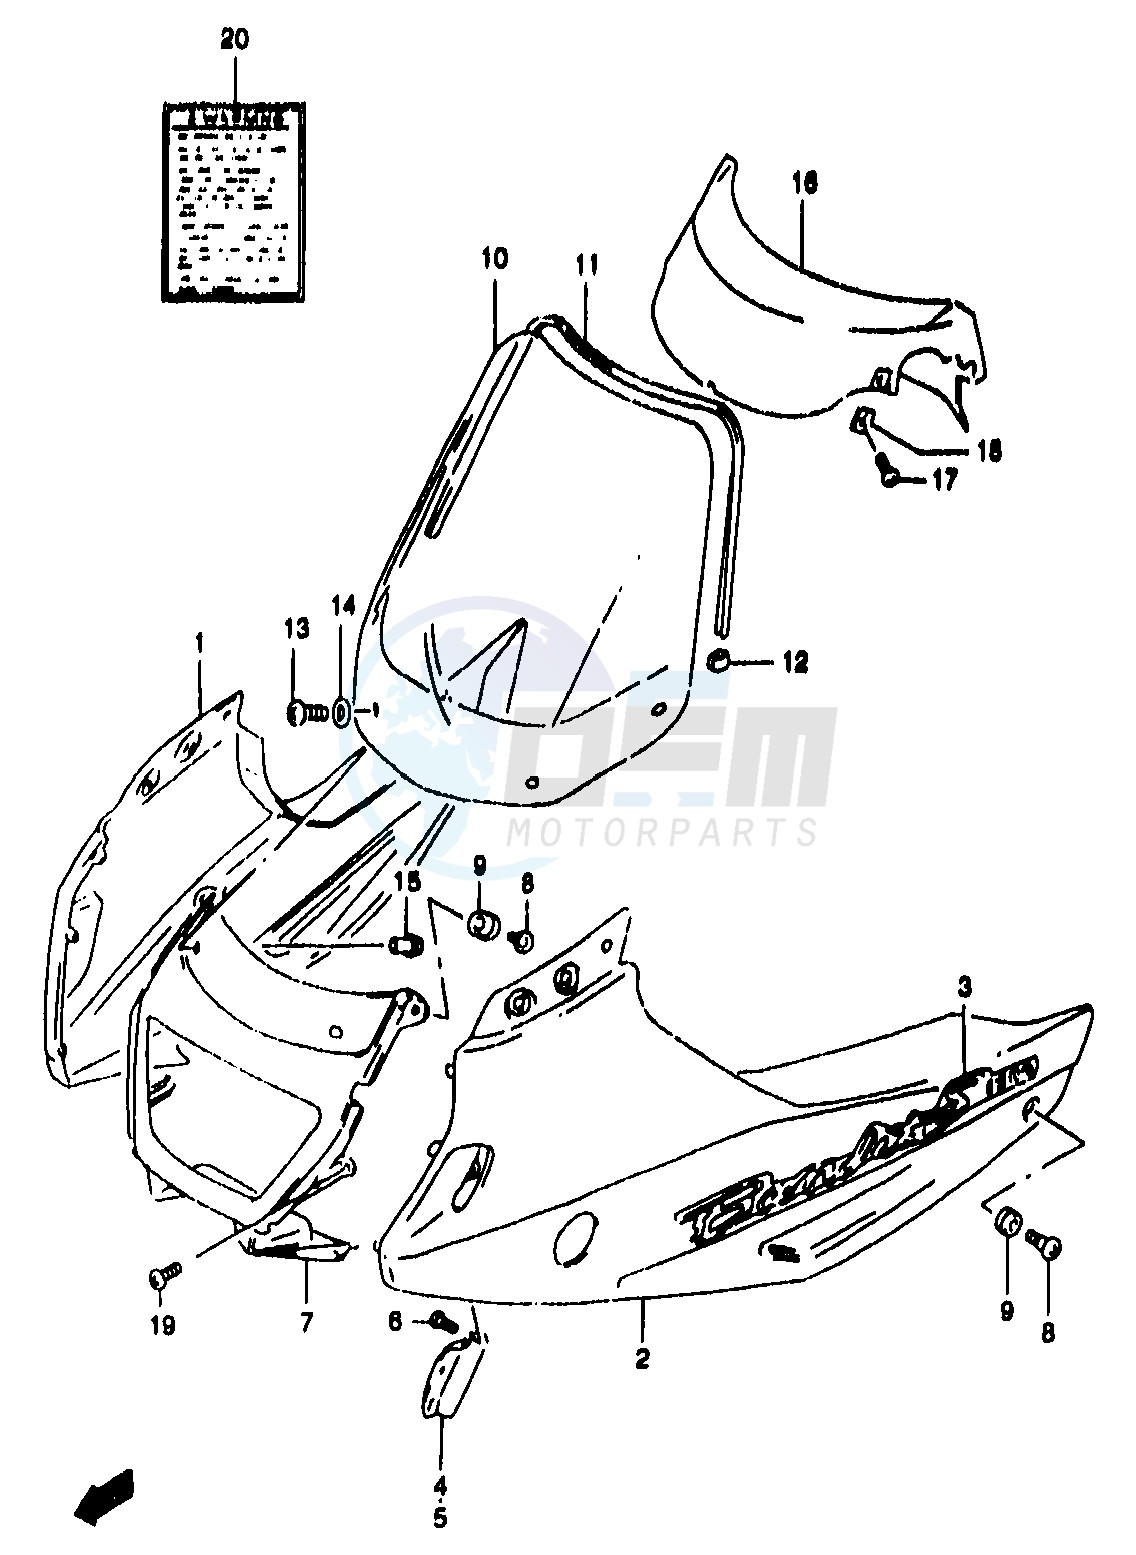 COWLING BODY (GSF1200SY SAY) blueprint